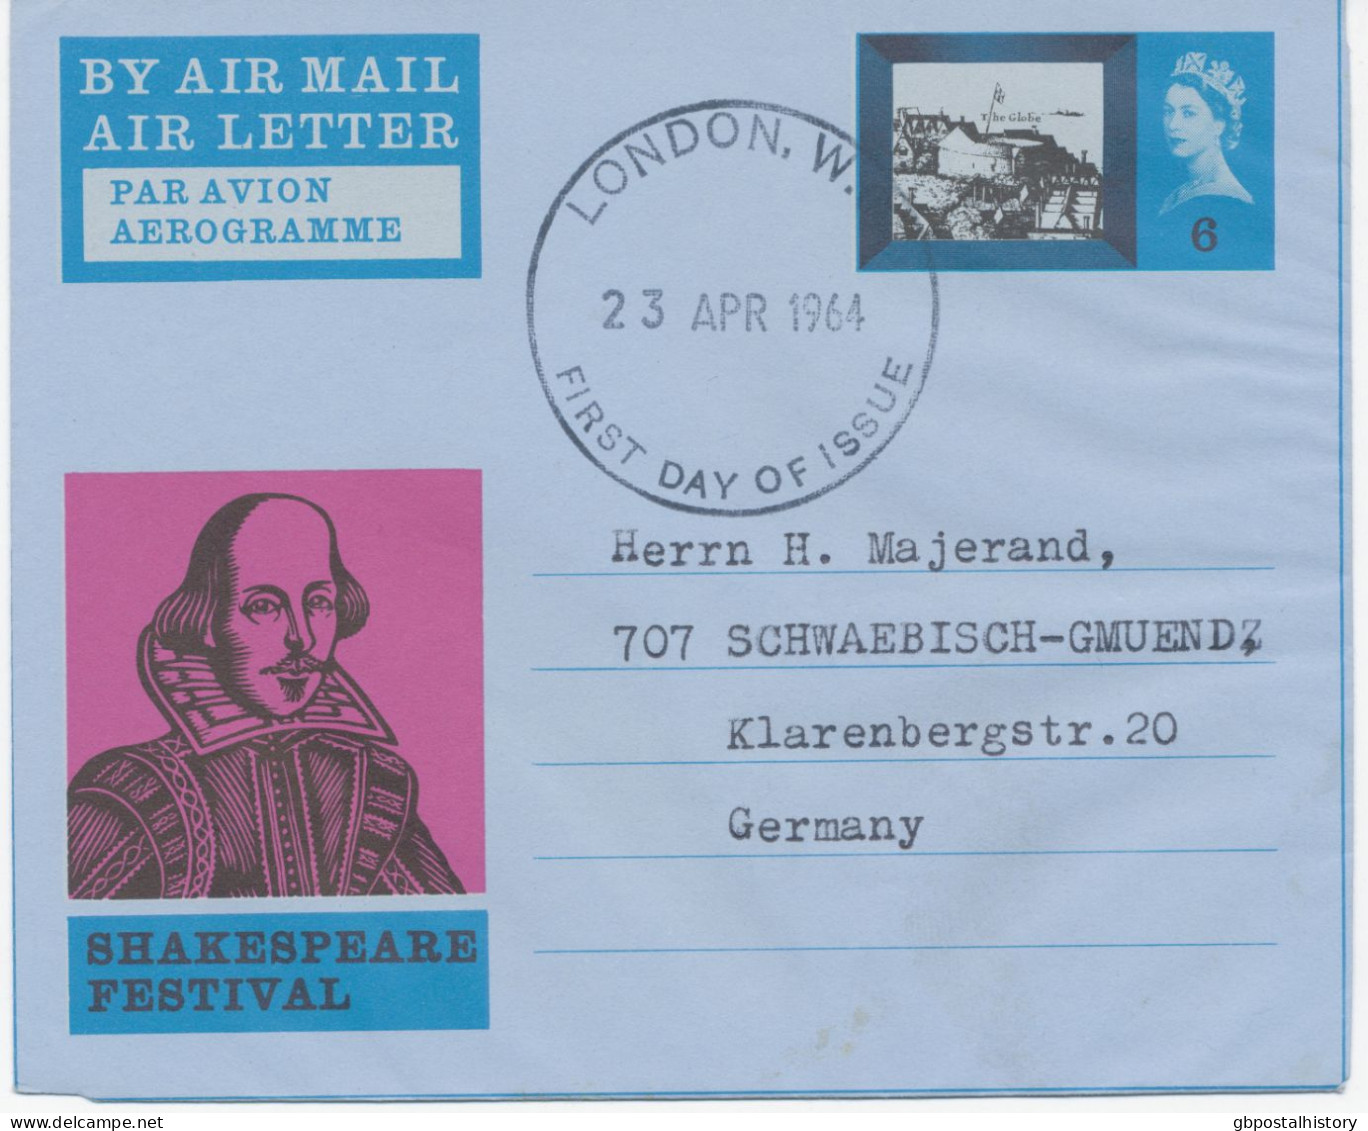 GB 23 APR 1964 SHAKESPEARE FESTIVAL 6d AIR LETTERS FDC's (BOTH!!) CDS 37mm FDI LONDON.W. / FIRST DAY OF ISSUE - Correct - Covers & Documents